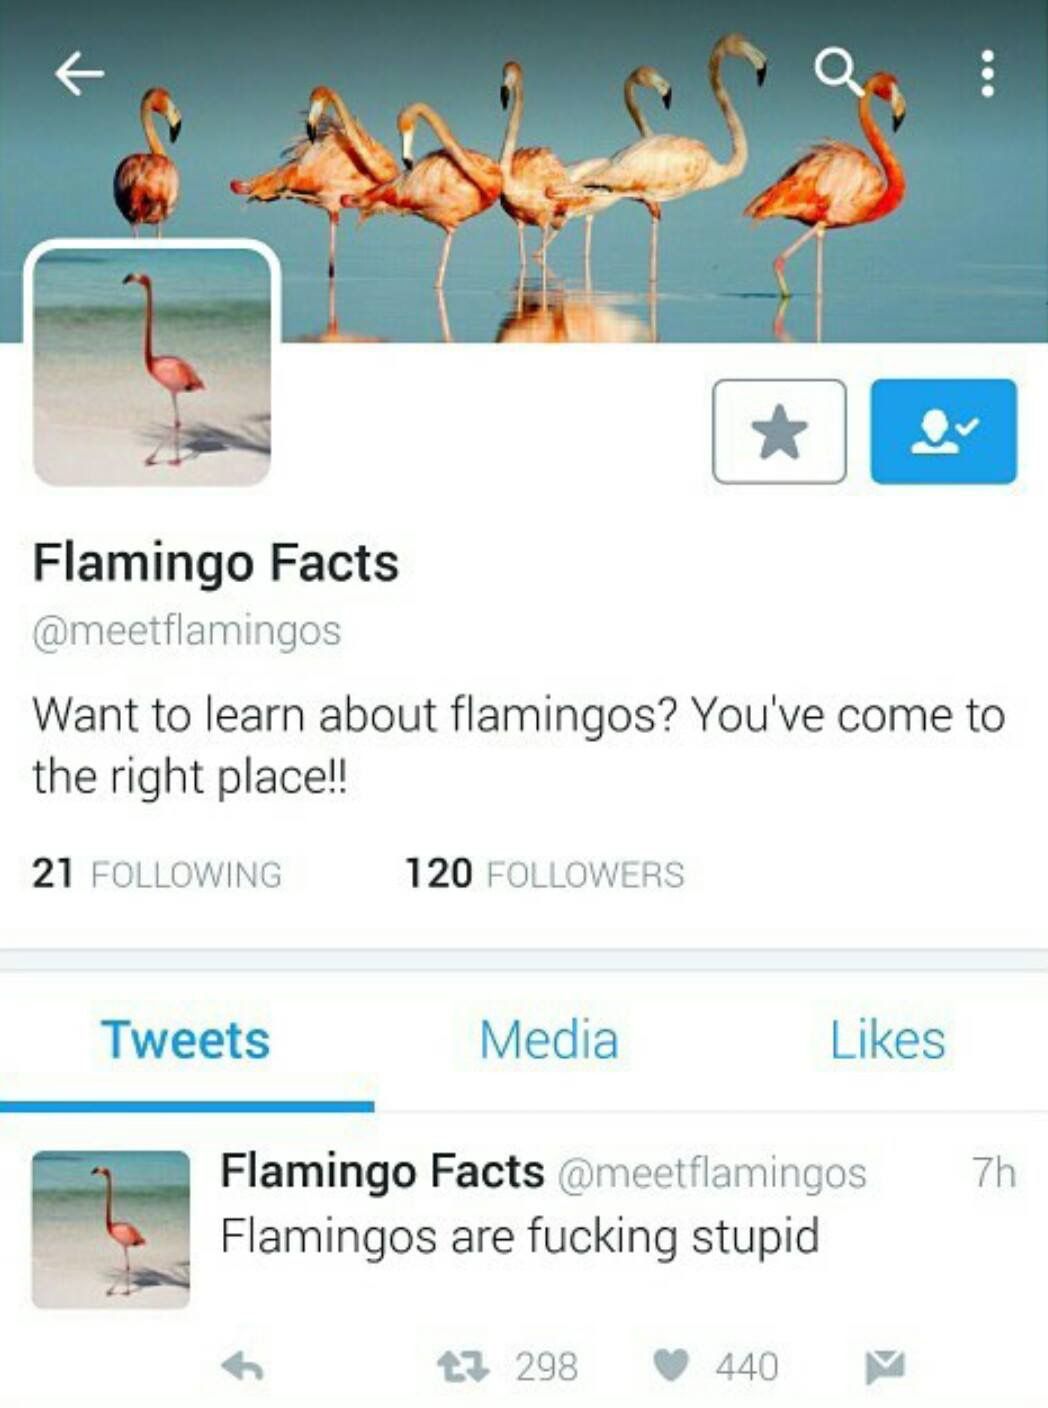 flamingos are fucking stupid - Flamingo Facts Want to learn about flamingos? You've come to the right place!! 21 ing 120 ers Tweets Media 7h Flamingo Facts Flamingos are fucking stupid t3 298 440